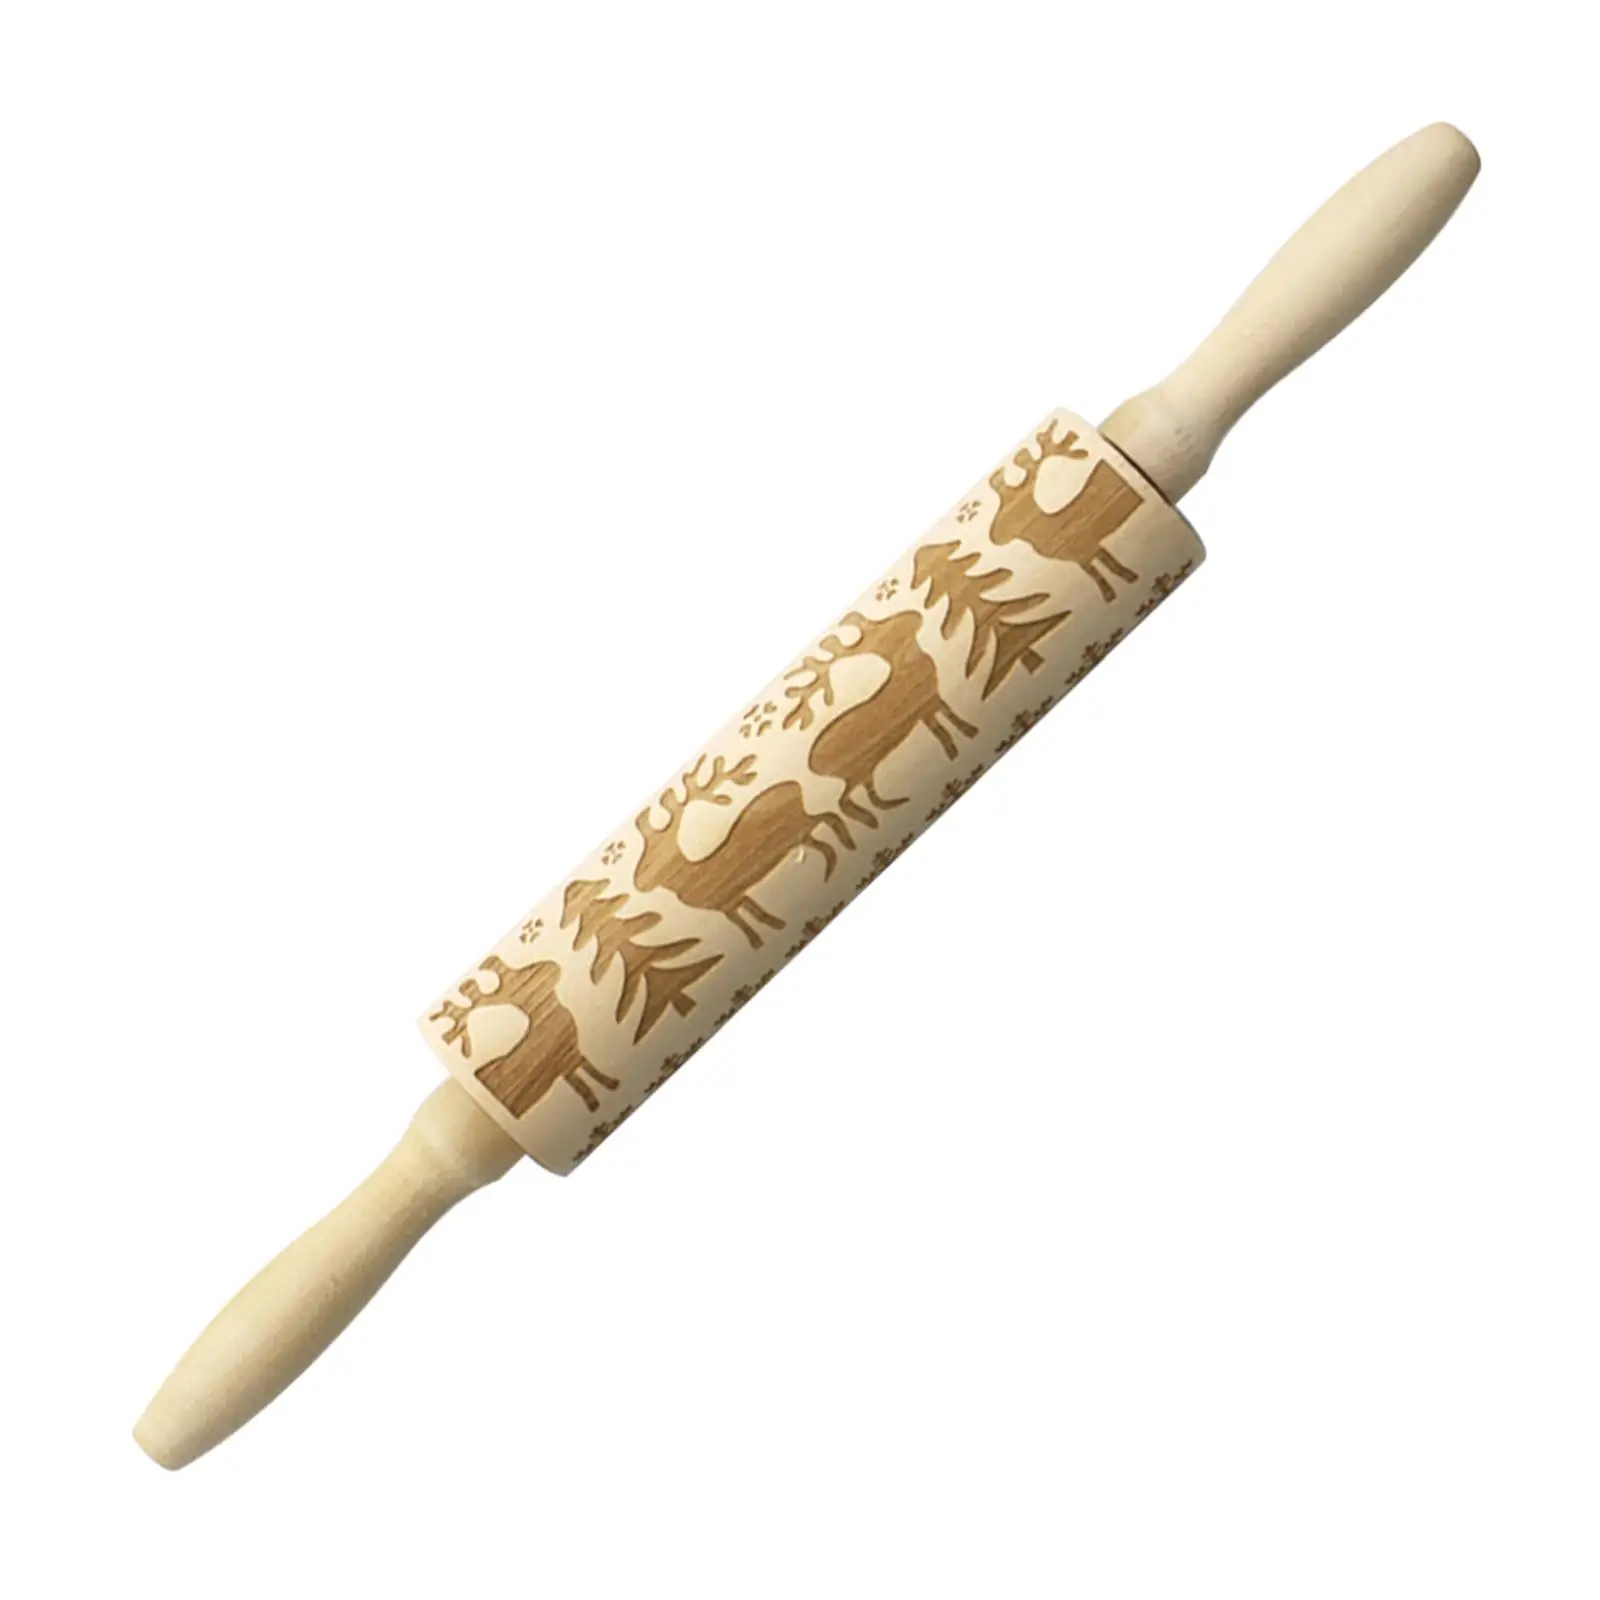 Christmas Rolling Pin 3D Holiday Rolling Pin Wood Wooden Rolling Pin with Patterns for Baking to Decorate Pizza Bread Pies Dough